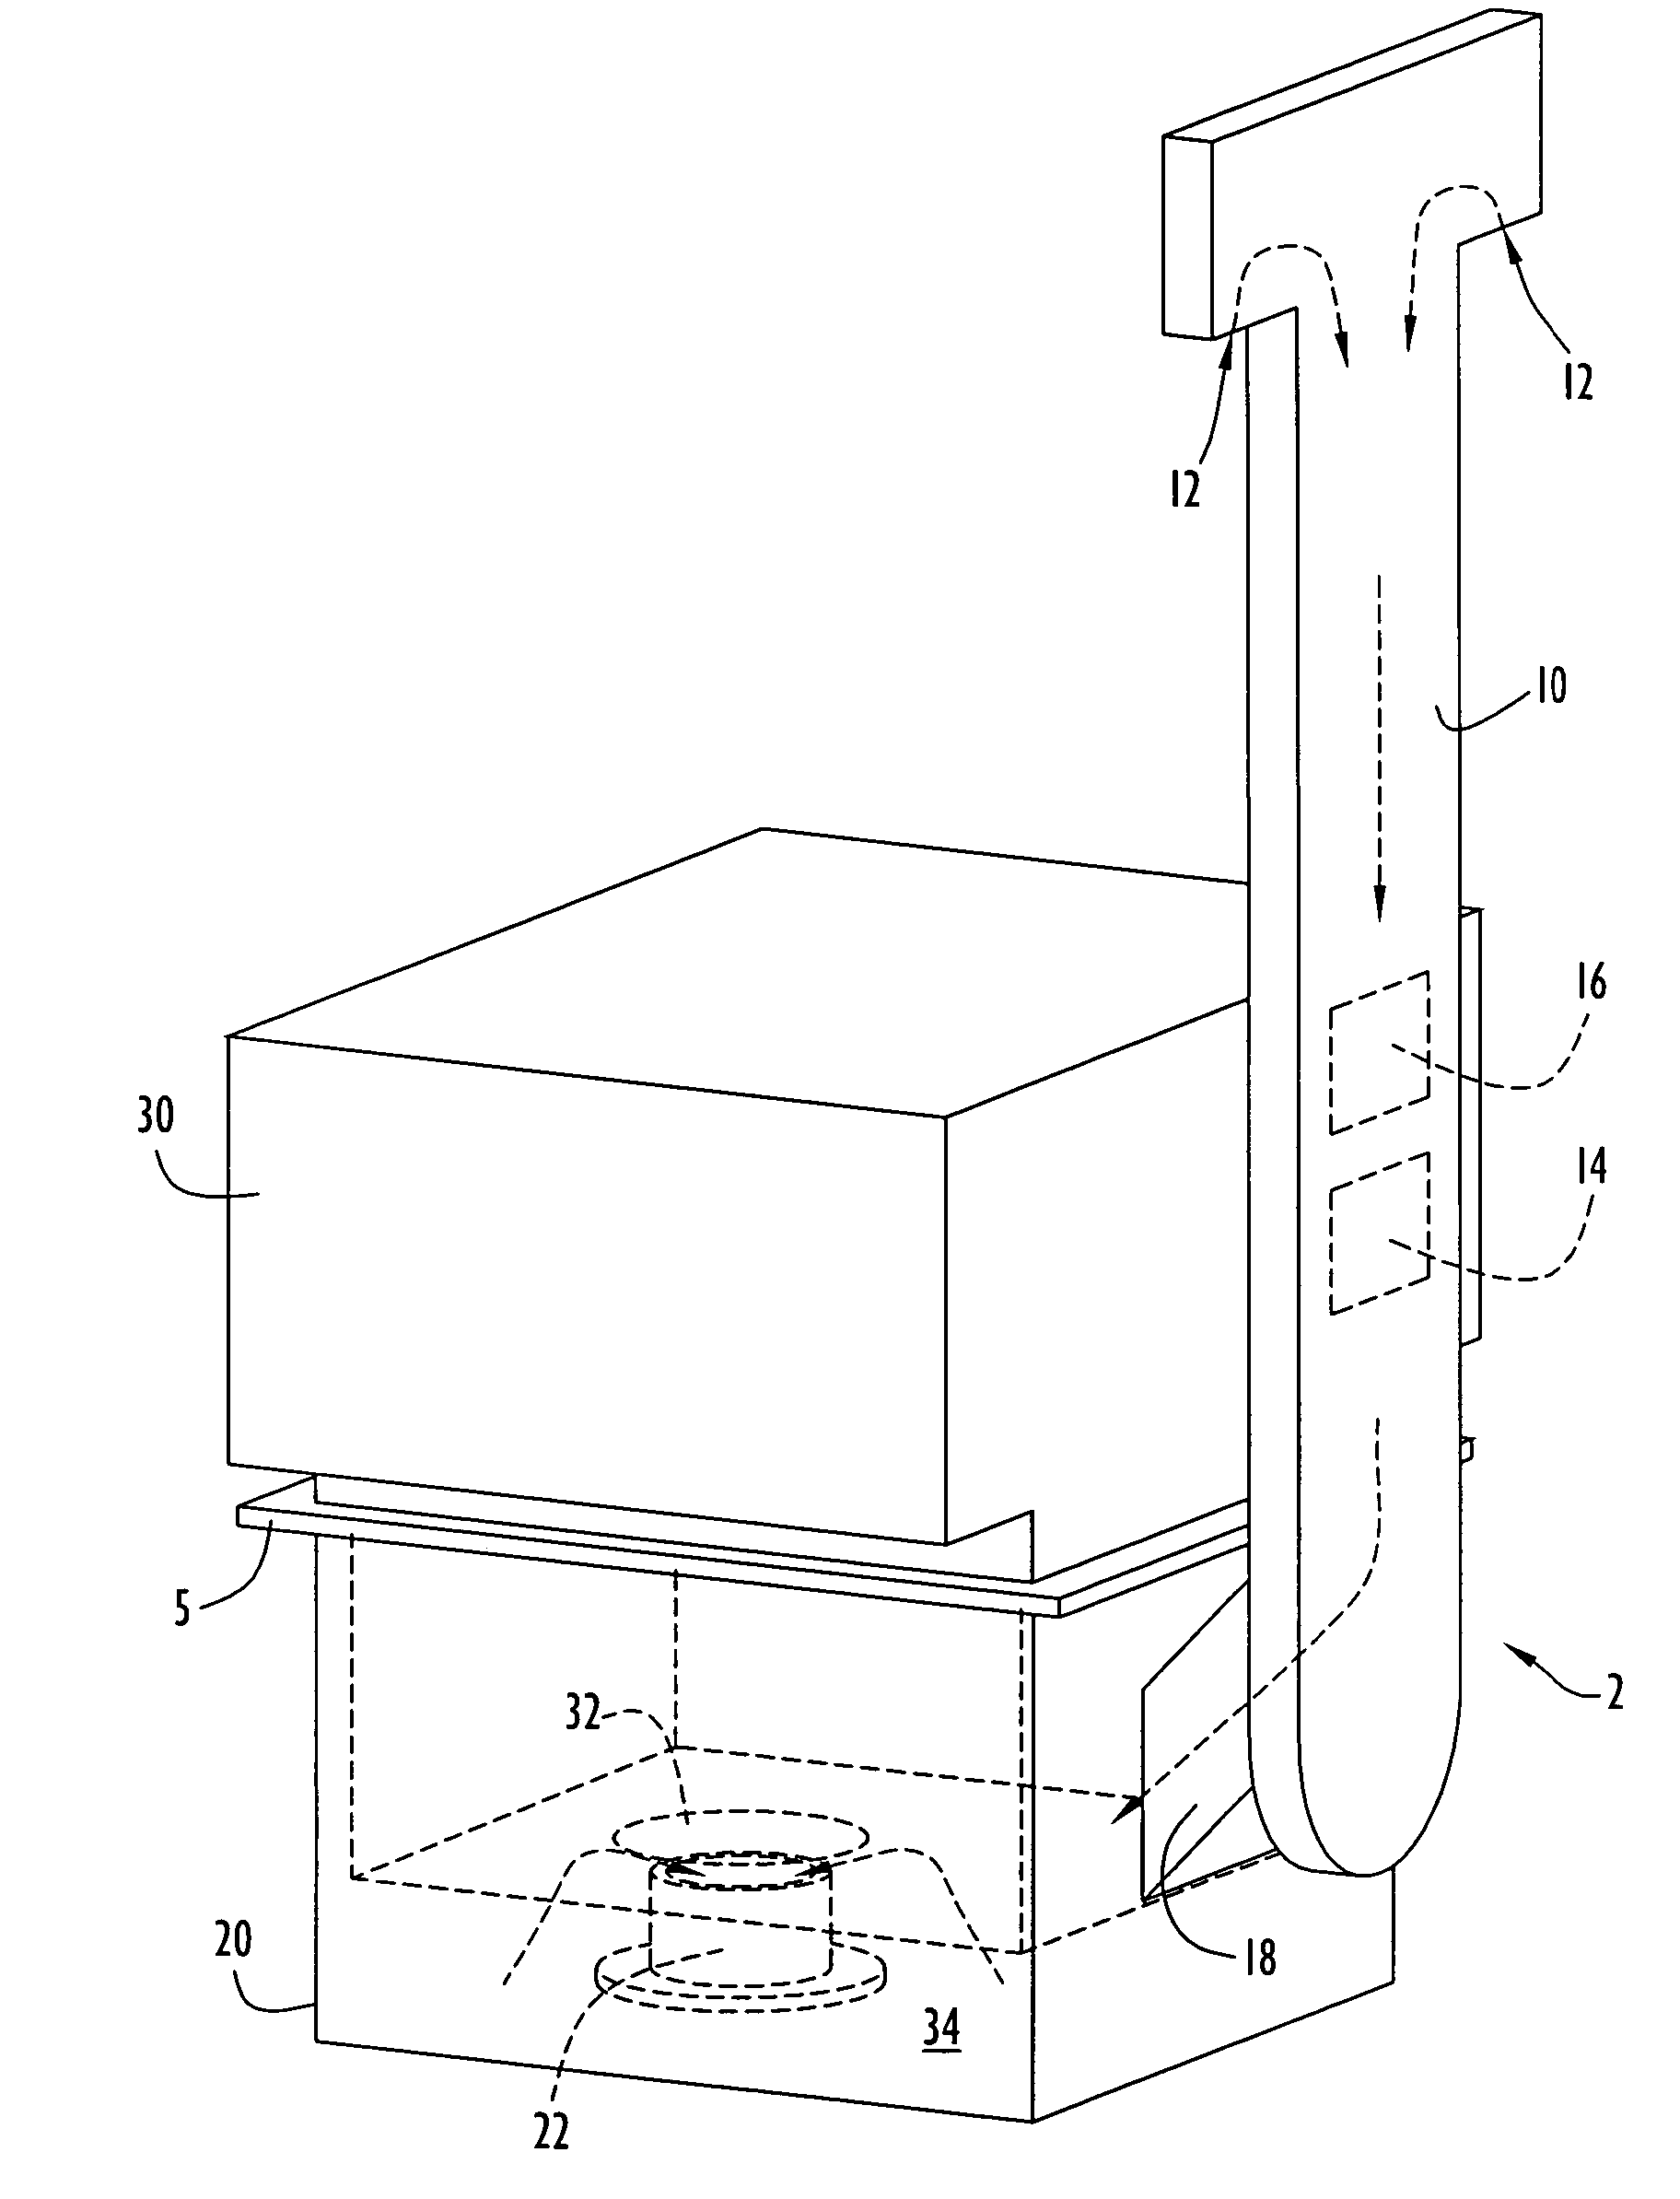 Dust mitigation and surface cleaning system for maintaining a surface free from dust and other materials